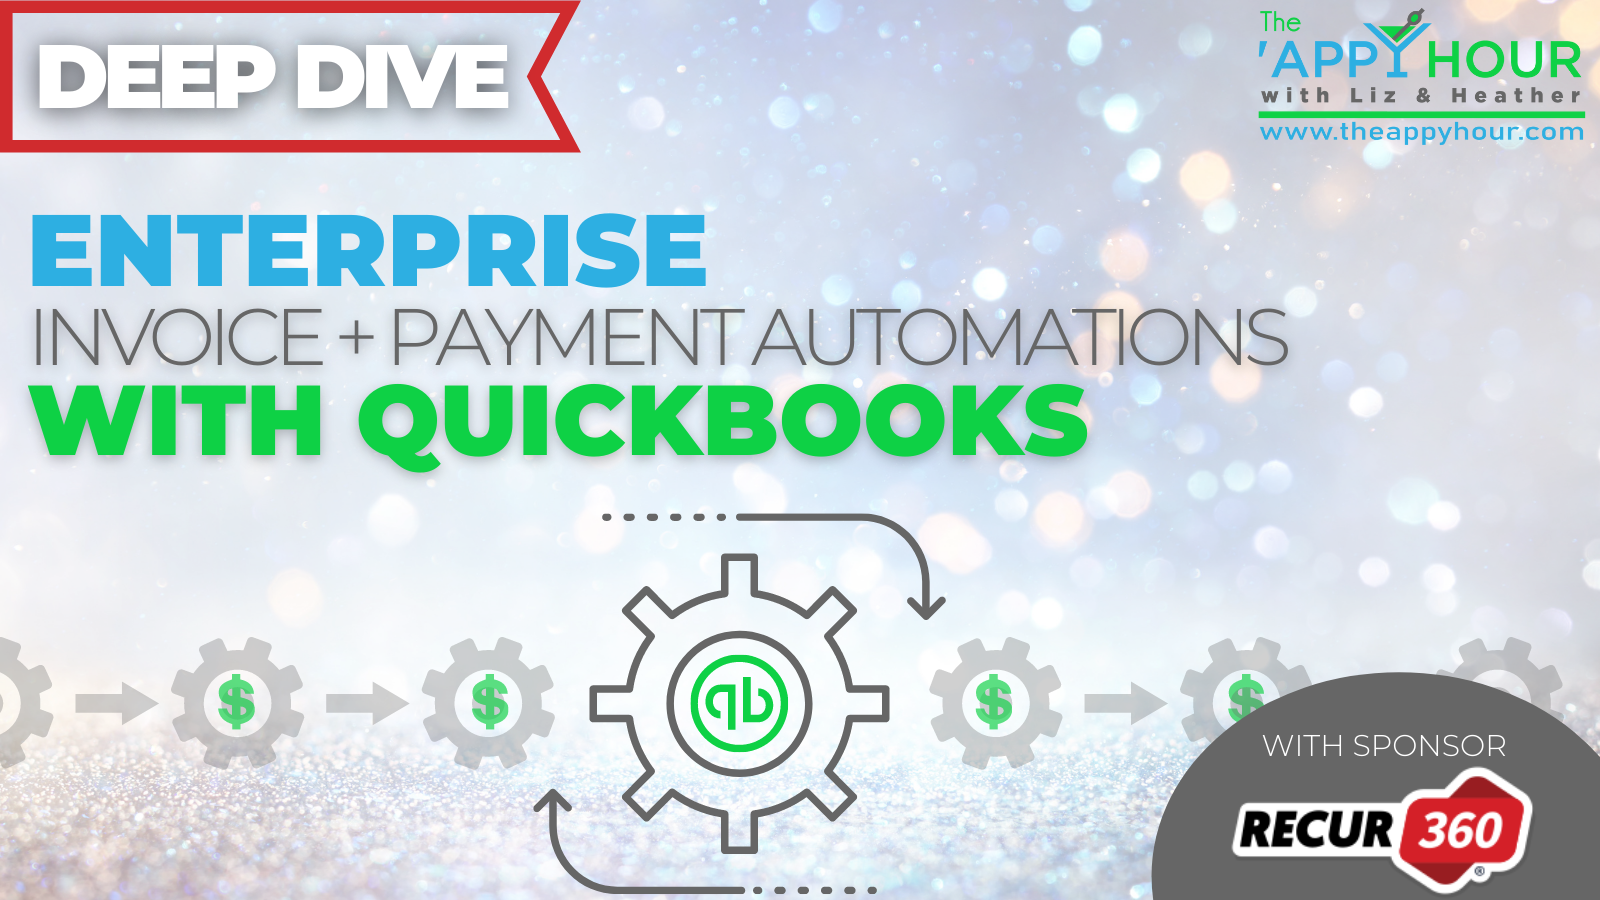 Recur360 Offers Enterprise Invoice and Payment Automations for QuickBooks